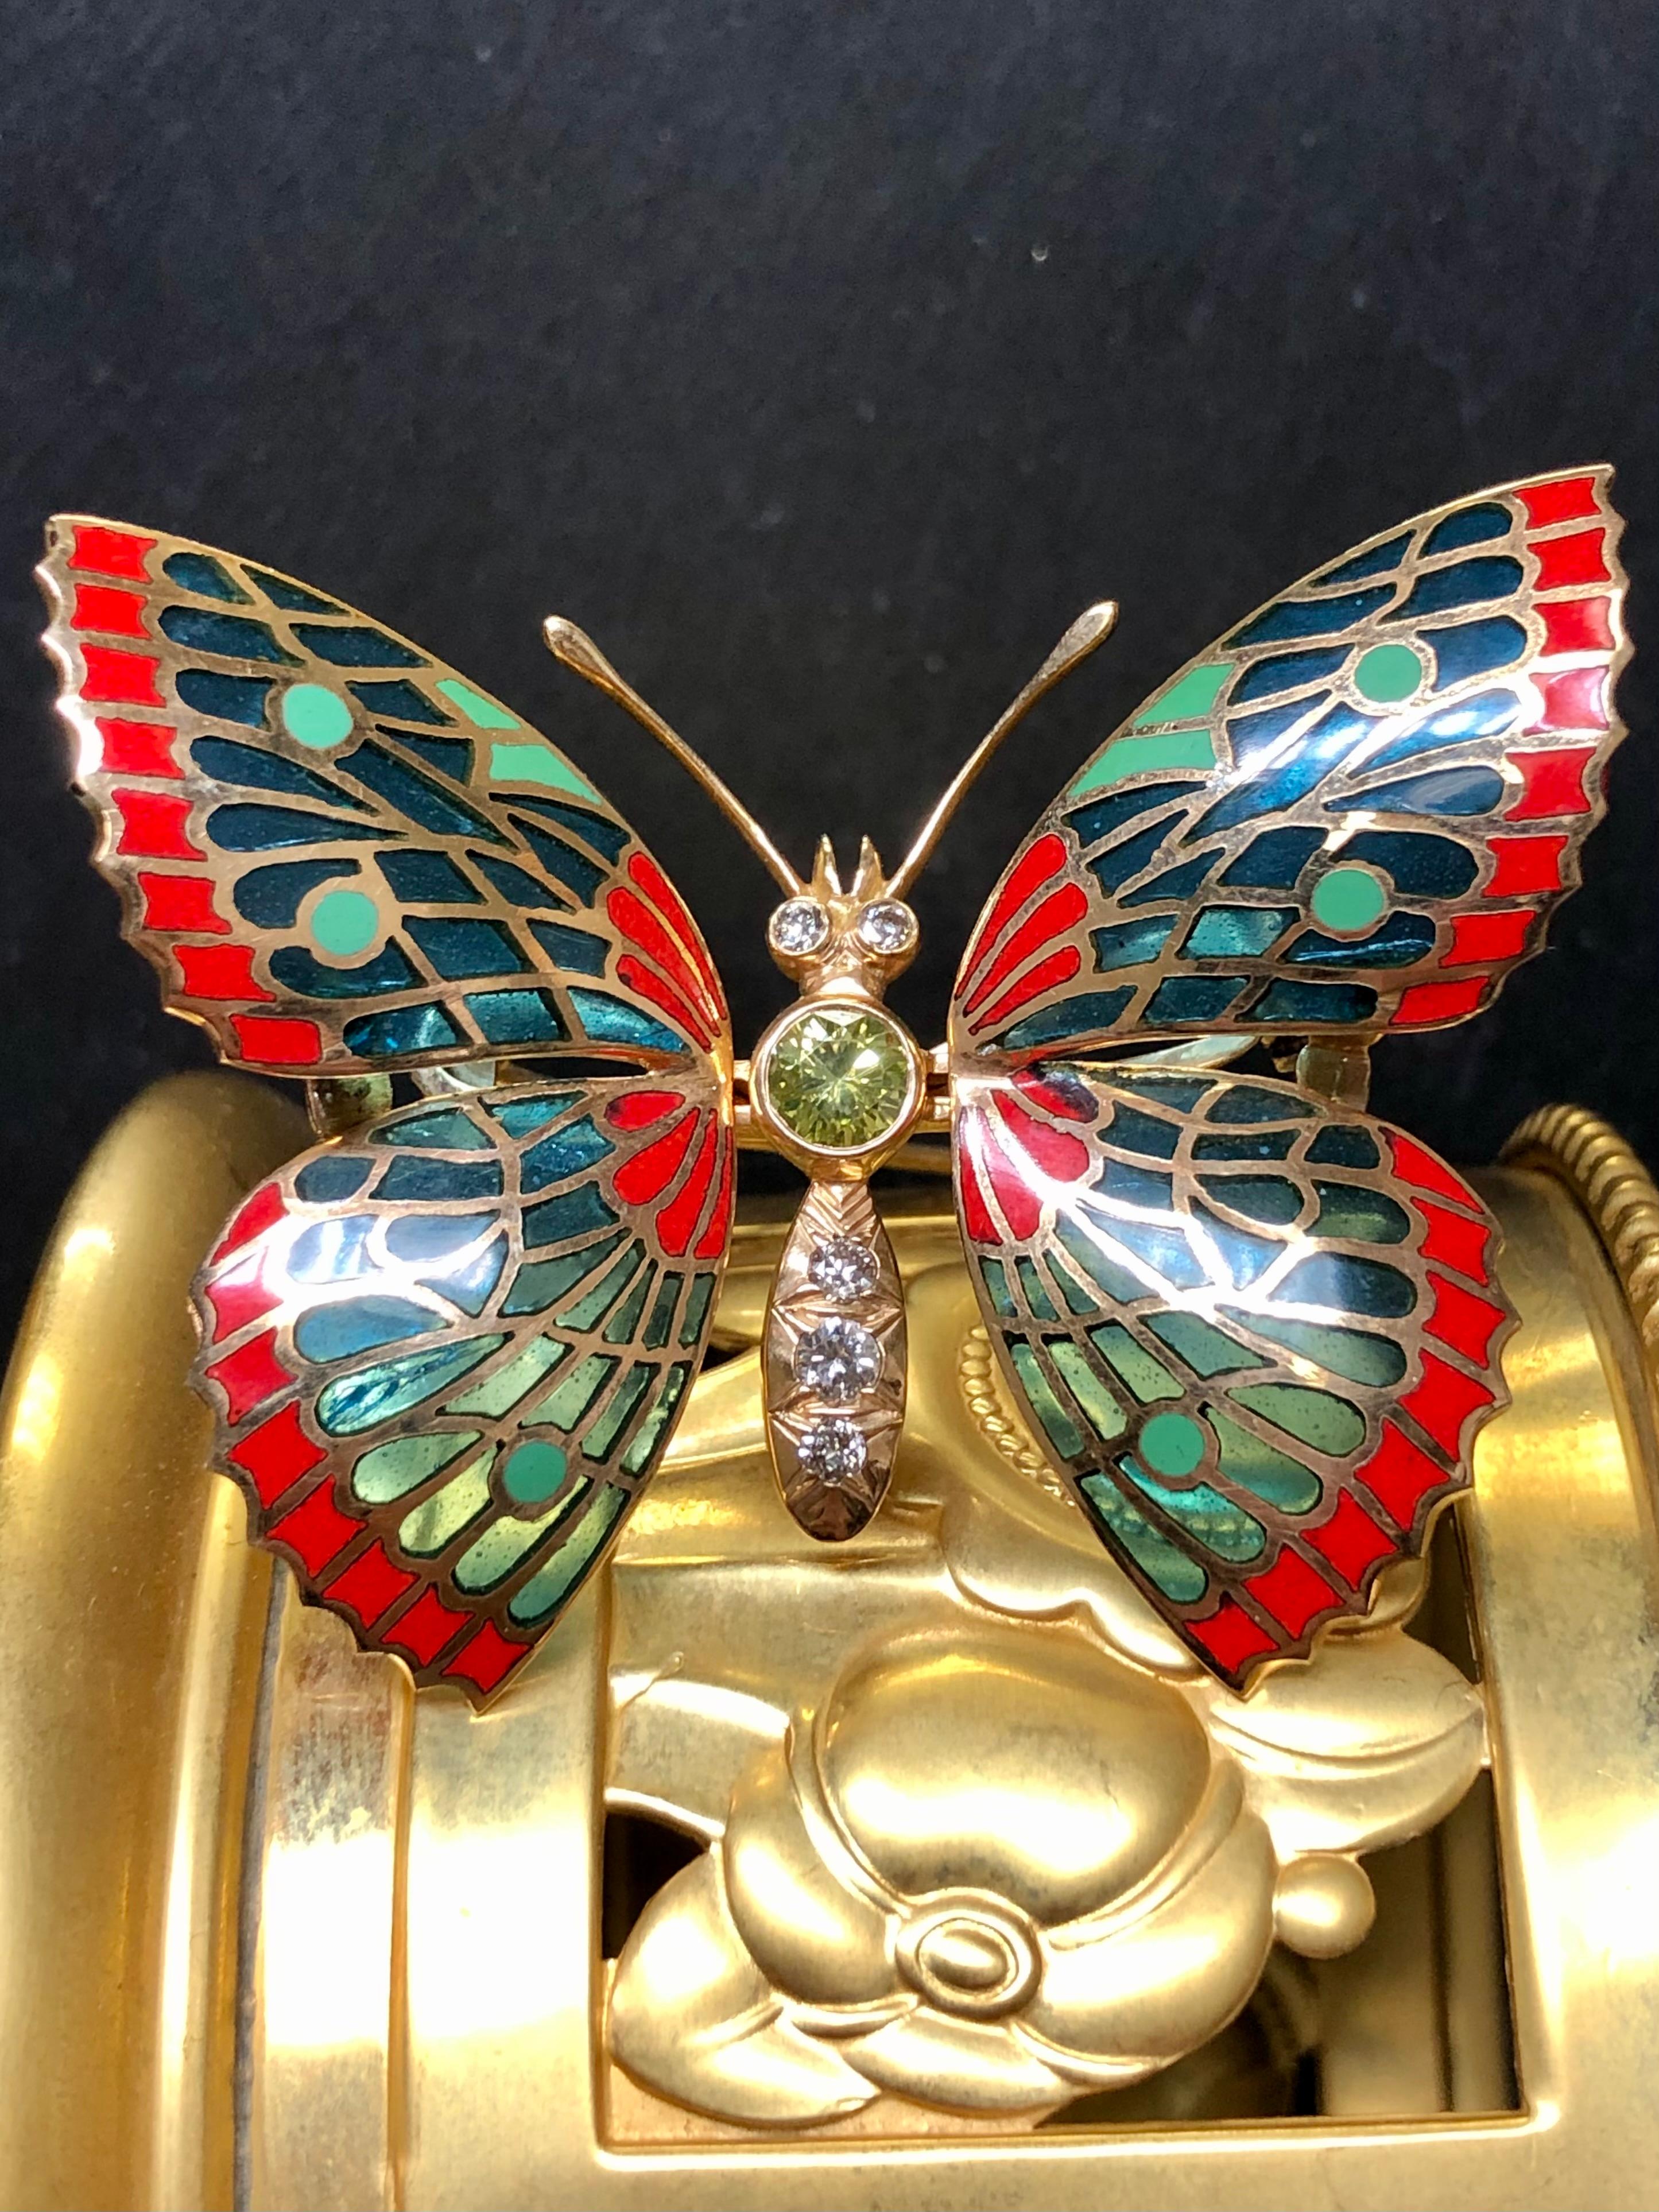 A beautiful example of well done plique-ajour enamel. This beautifully crafted piece has been done in 18K yellow gold and centered with an approximately .50ct fancy yellowish green Vs clarity diamond (likely treated) as well as another approximately